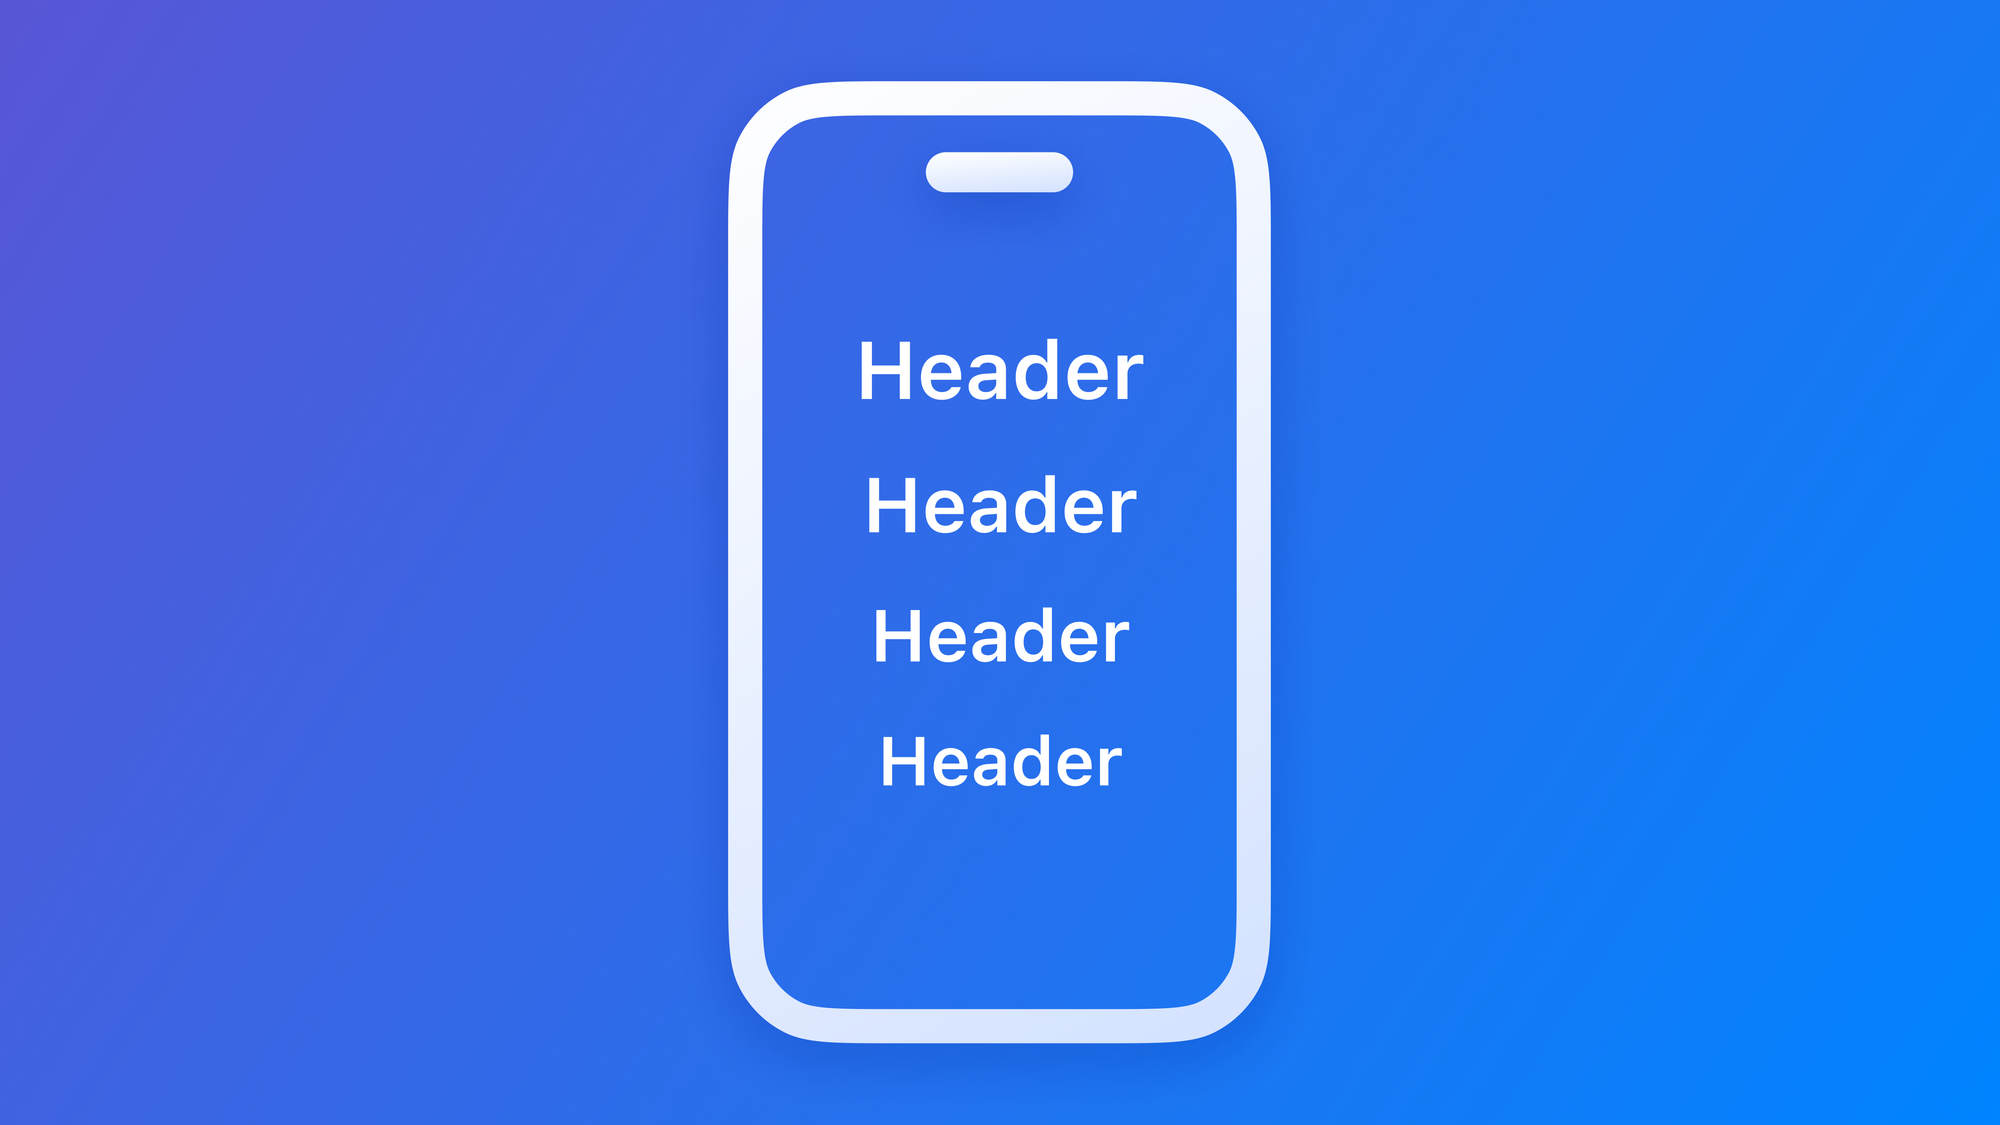 Preparing your App for VoiceOver: Headers and Heading Level